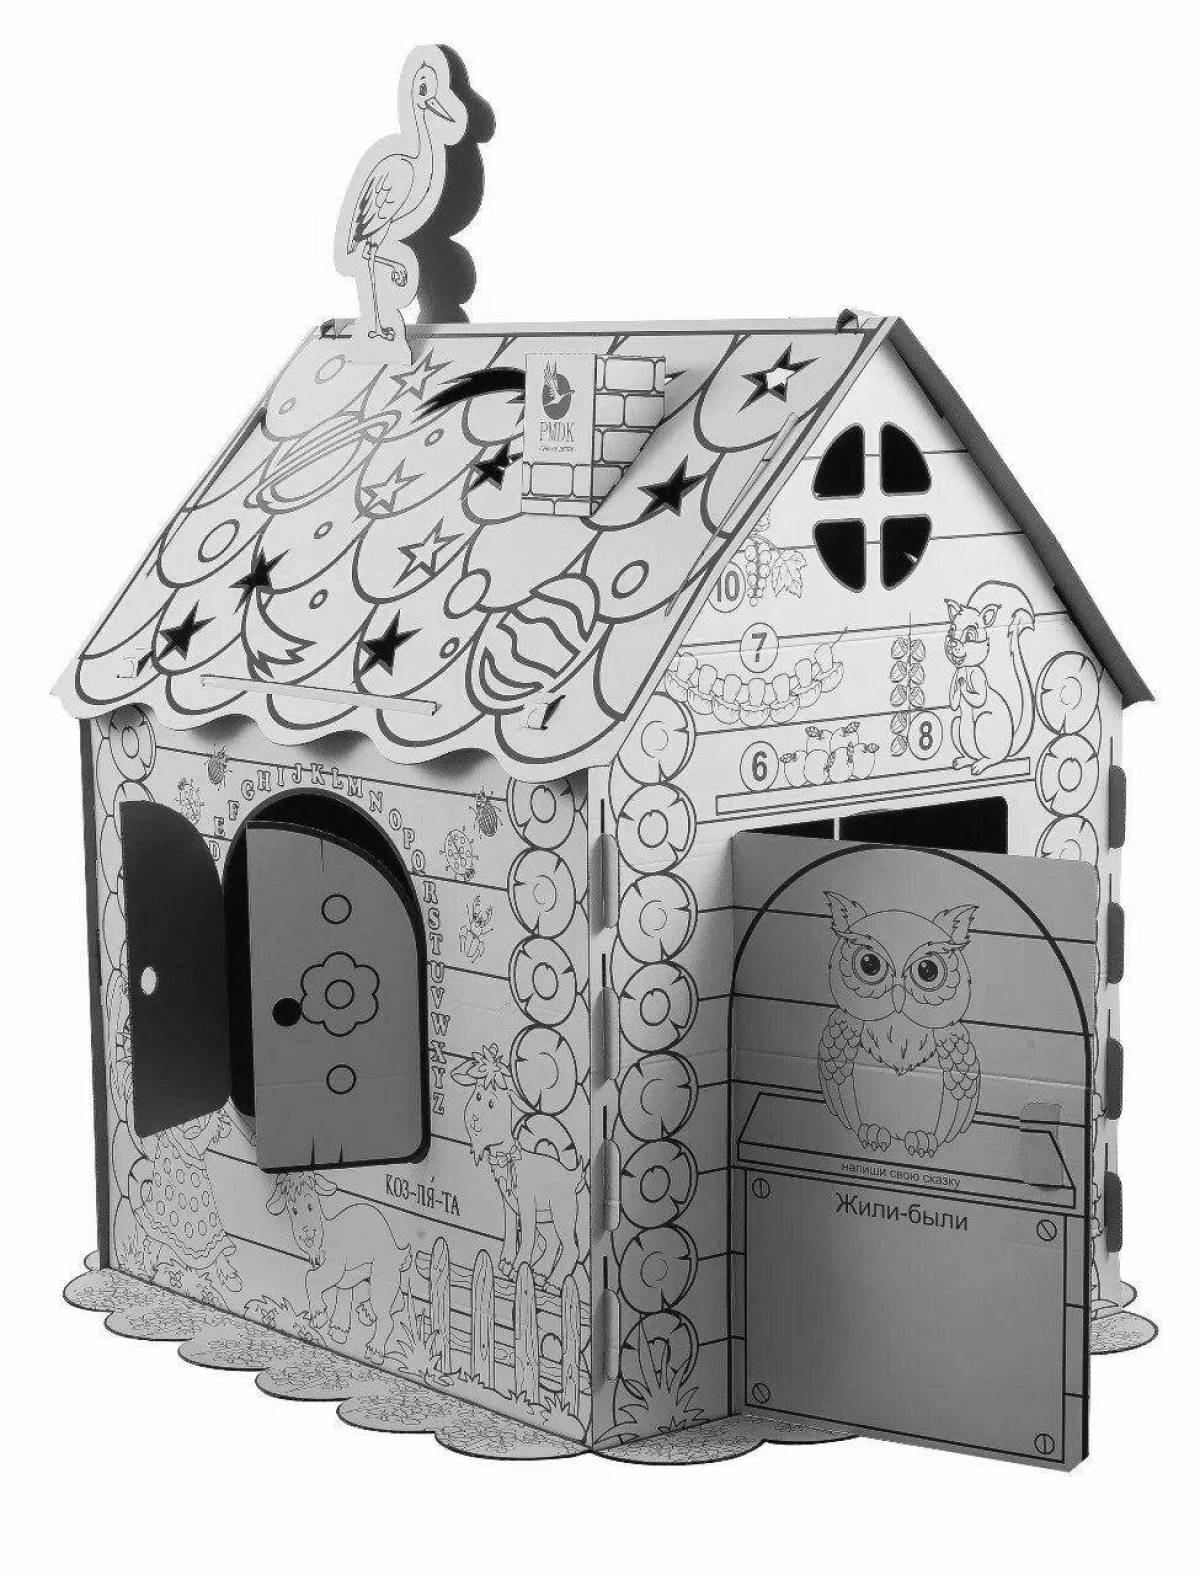 Adorable playhouse coloring page